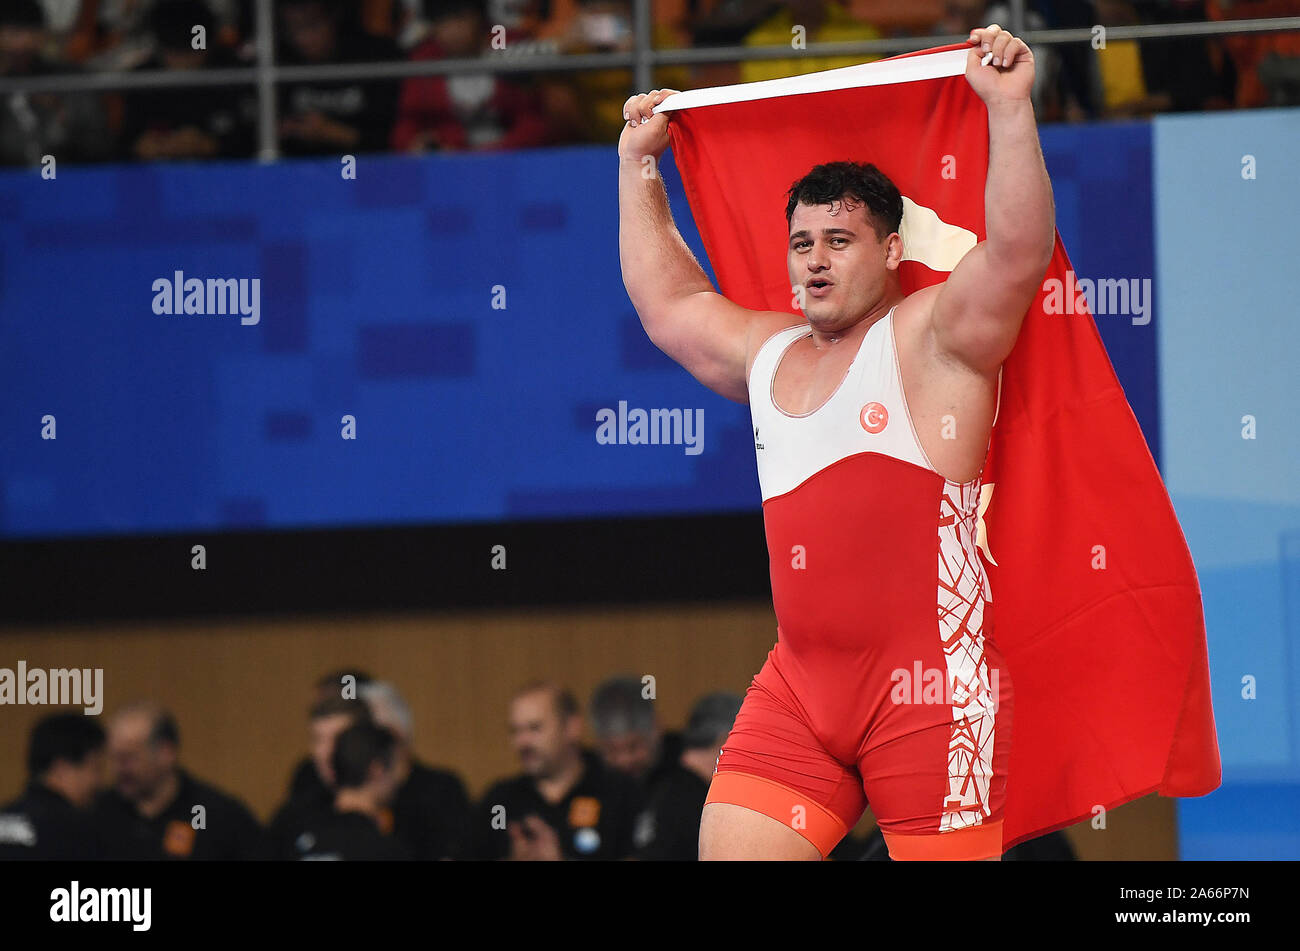 Riza Kayaalp of Turkey celebrates after winning the gold medal in the men's  -130kg category bout at the European Wrestling Championships in Warsaw,  Poland, Saturday, April 24, 2021.(AP Photo/Czarek Sokolowski Stock Photo 